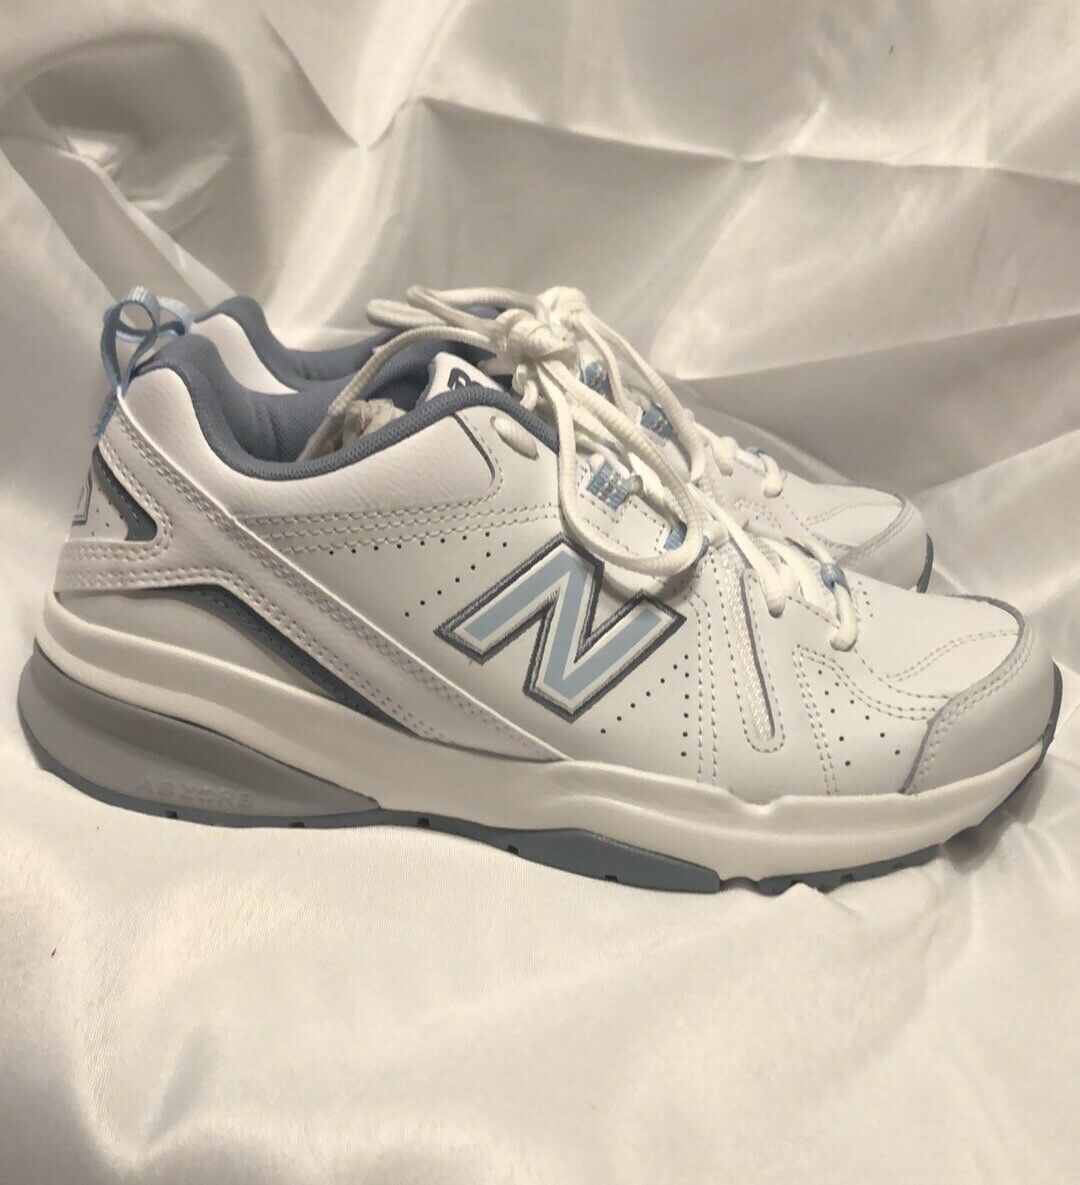 New Balance 608 V5 Women’s Casual Comfort Cross Trainer Shoes Size 8.5 New